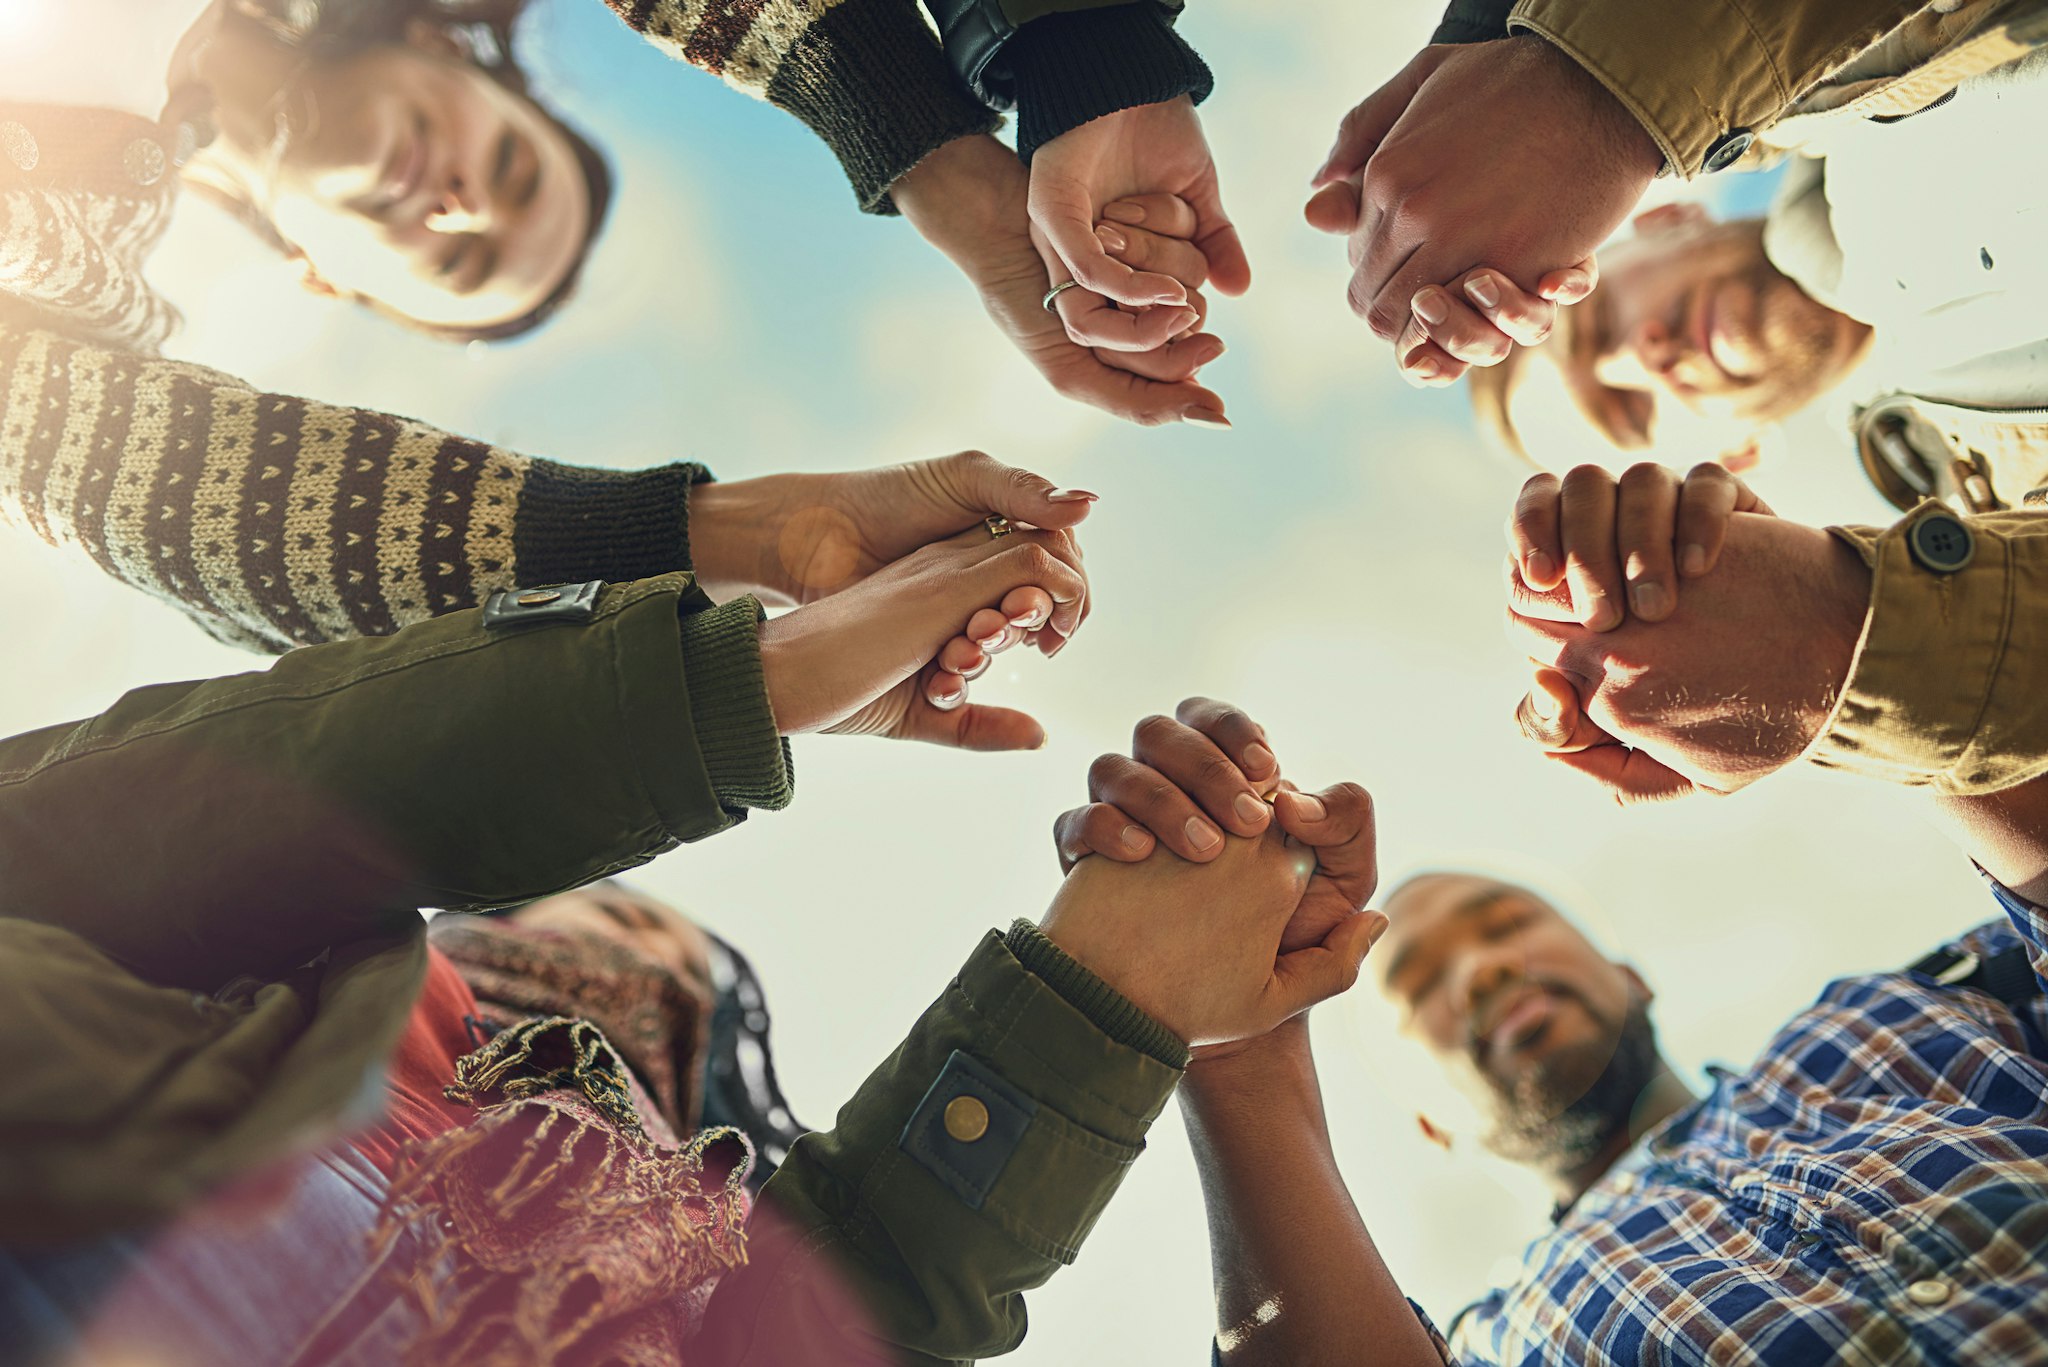 Shot of a group of friends putting their hands together in prayer.